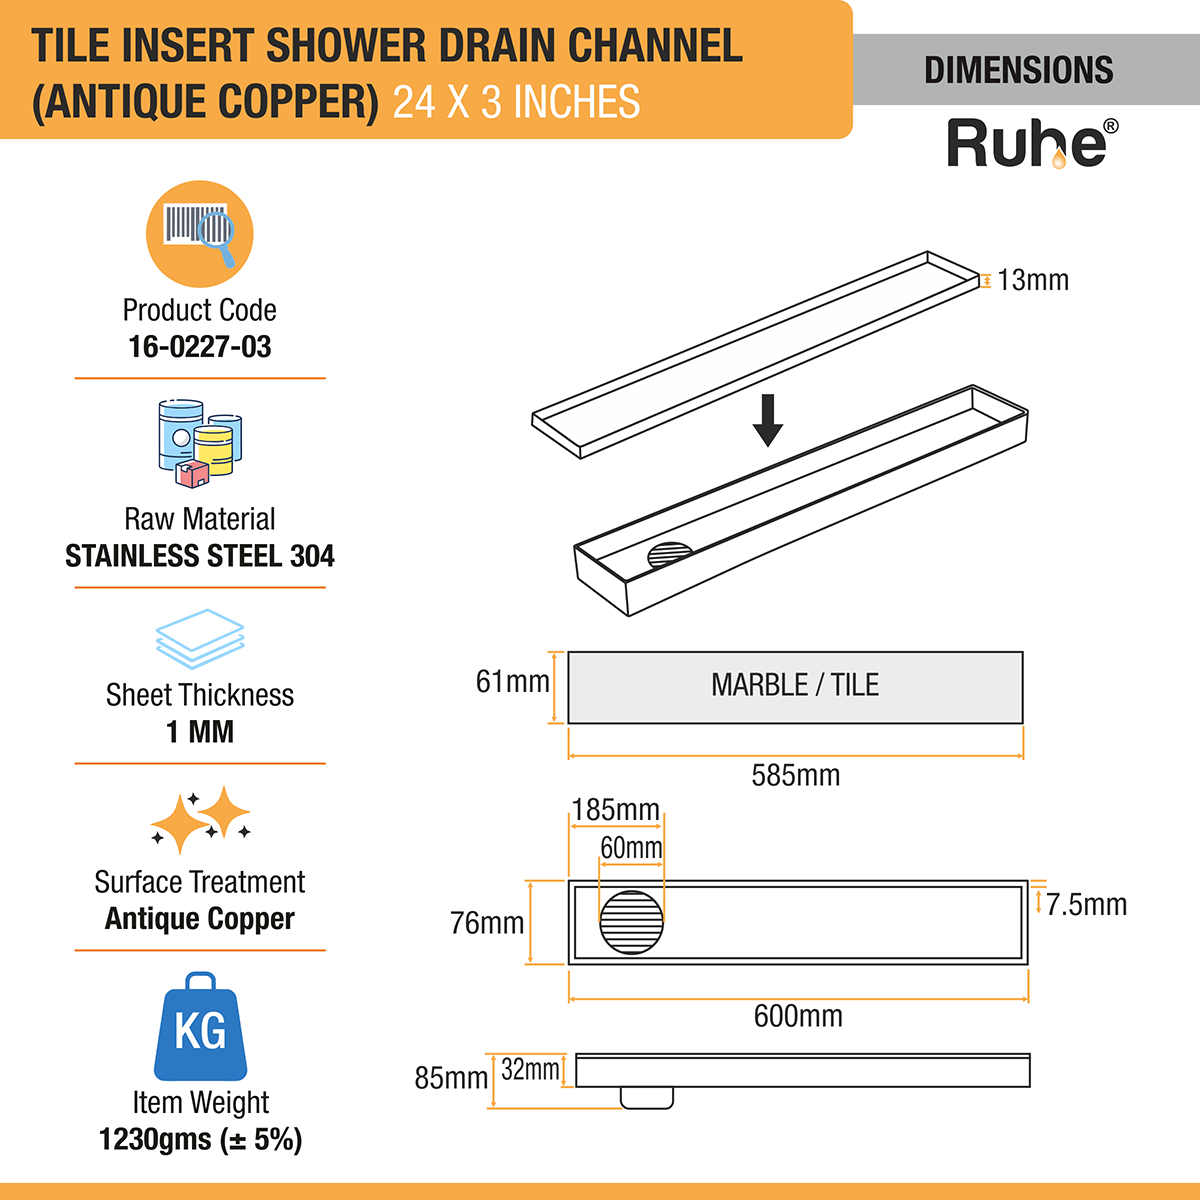 Tile Insert Shower Drain Channel (24 x 3 Inches) ROSE GOLD PVD Coated dimensions and sizes